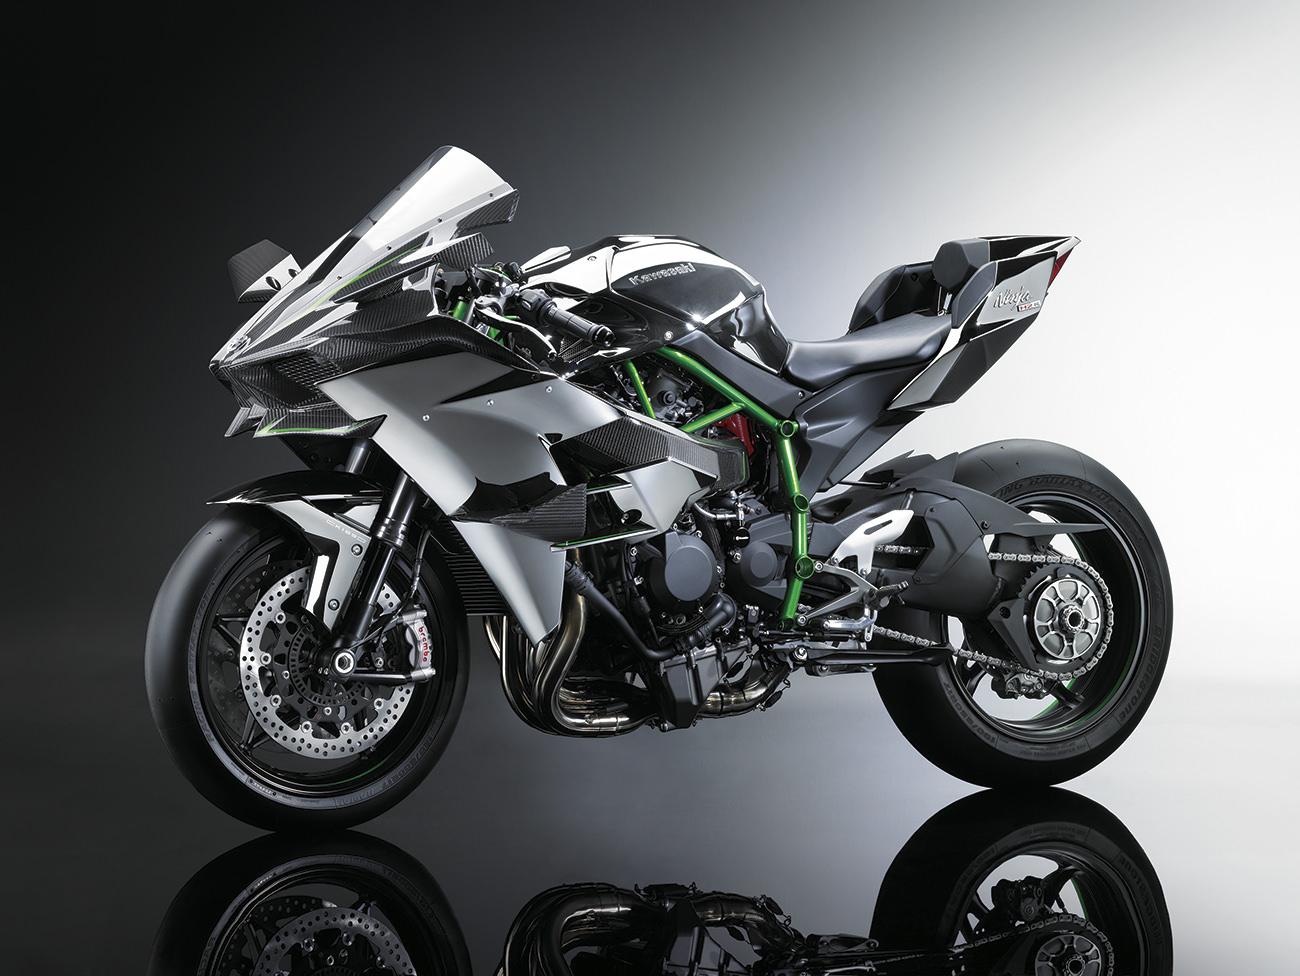 The Ninja H2R by a